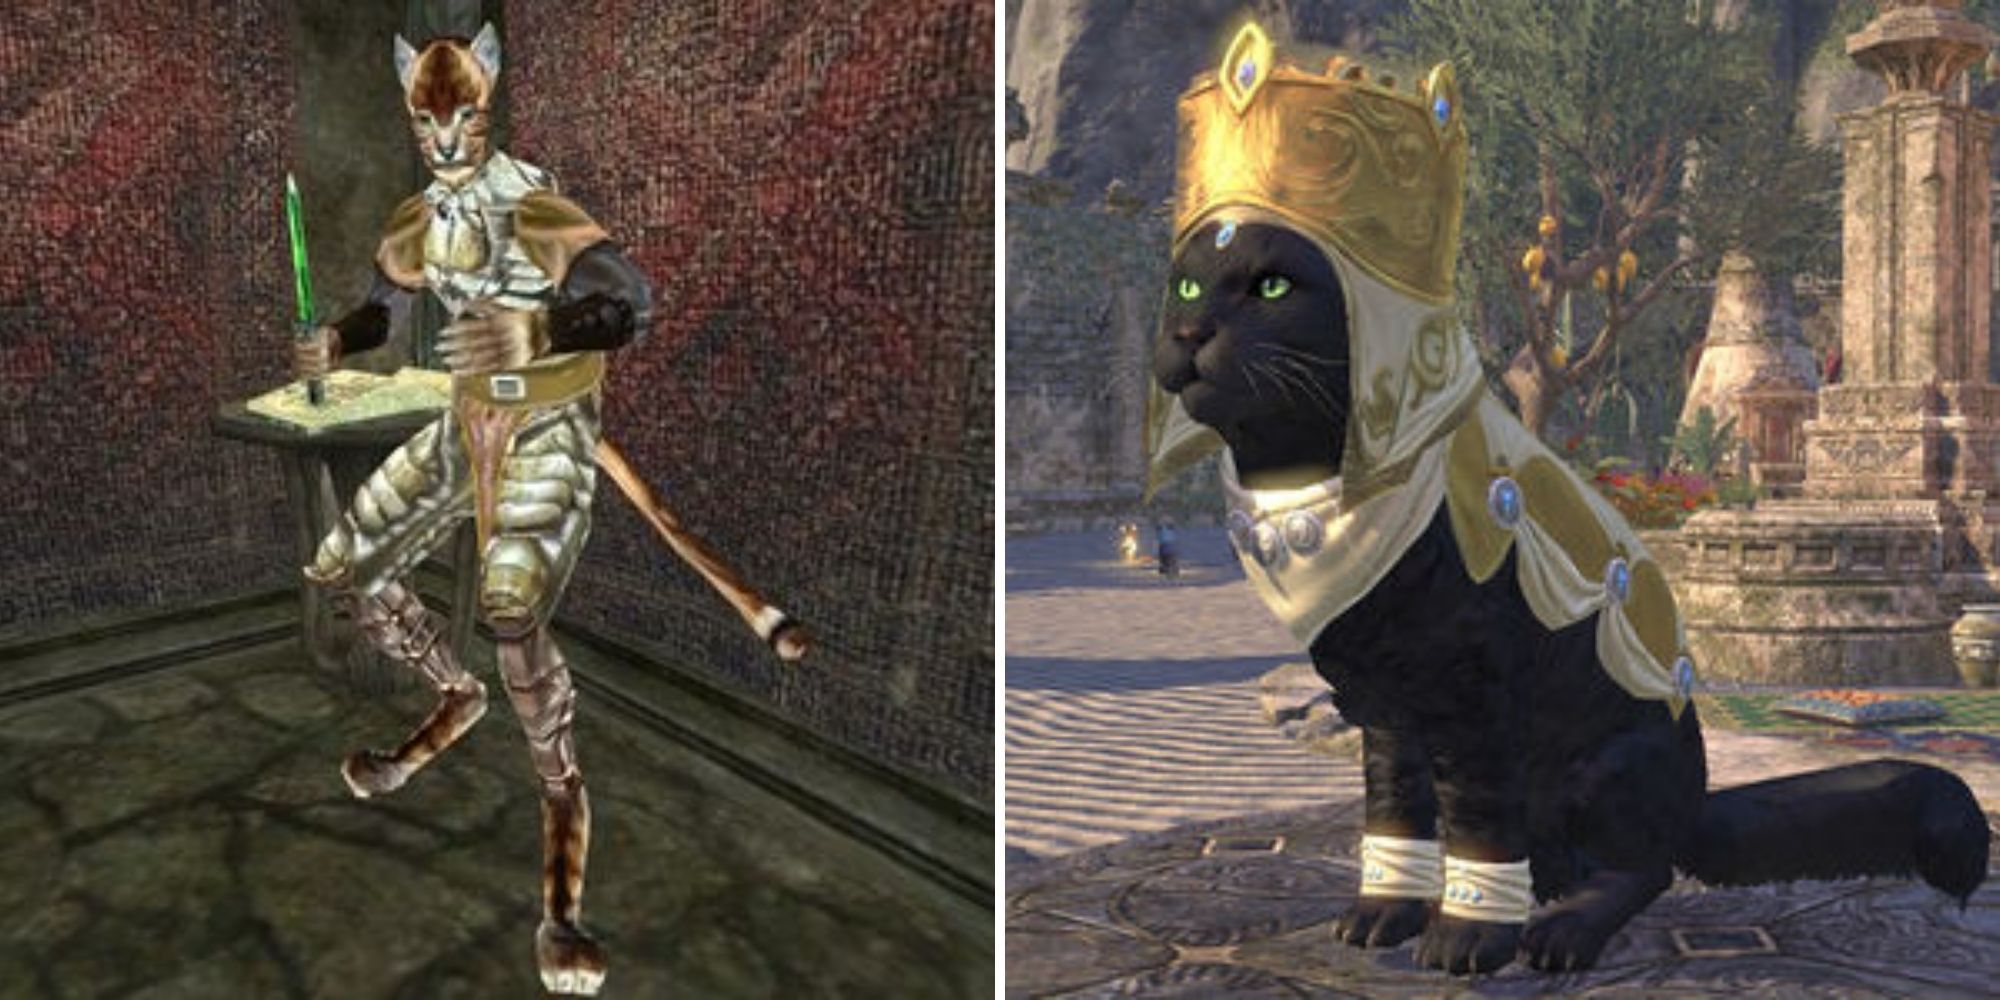 Khajiit with a dagger and Khajiit with a crown from seperate Elder Scrolls titles